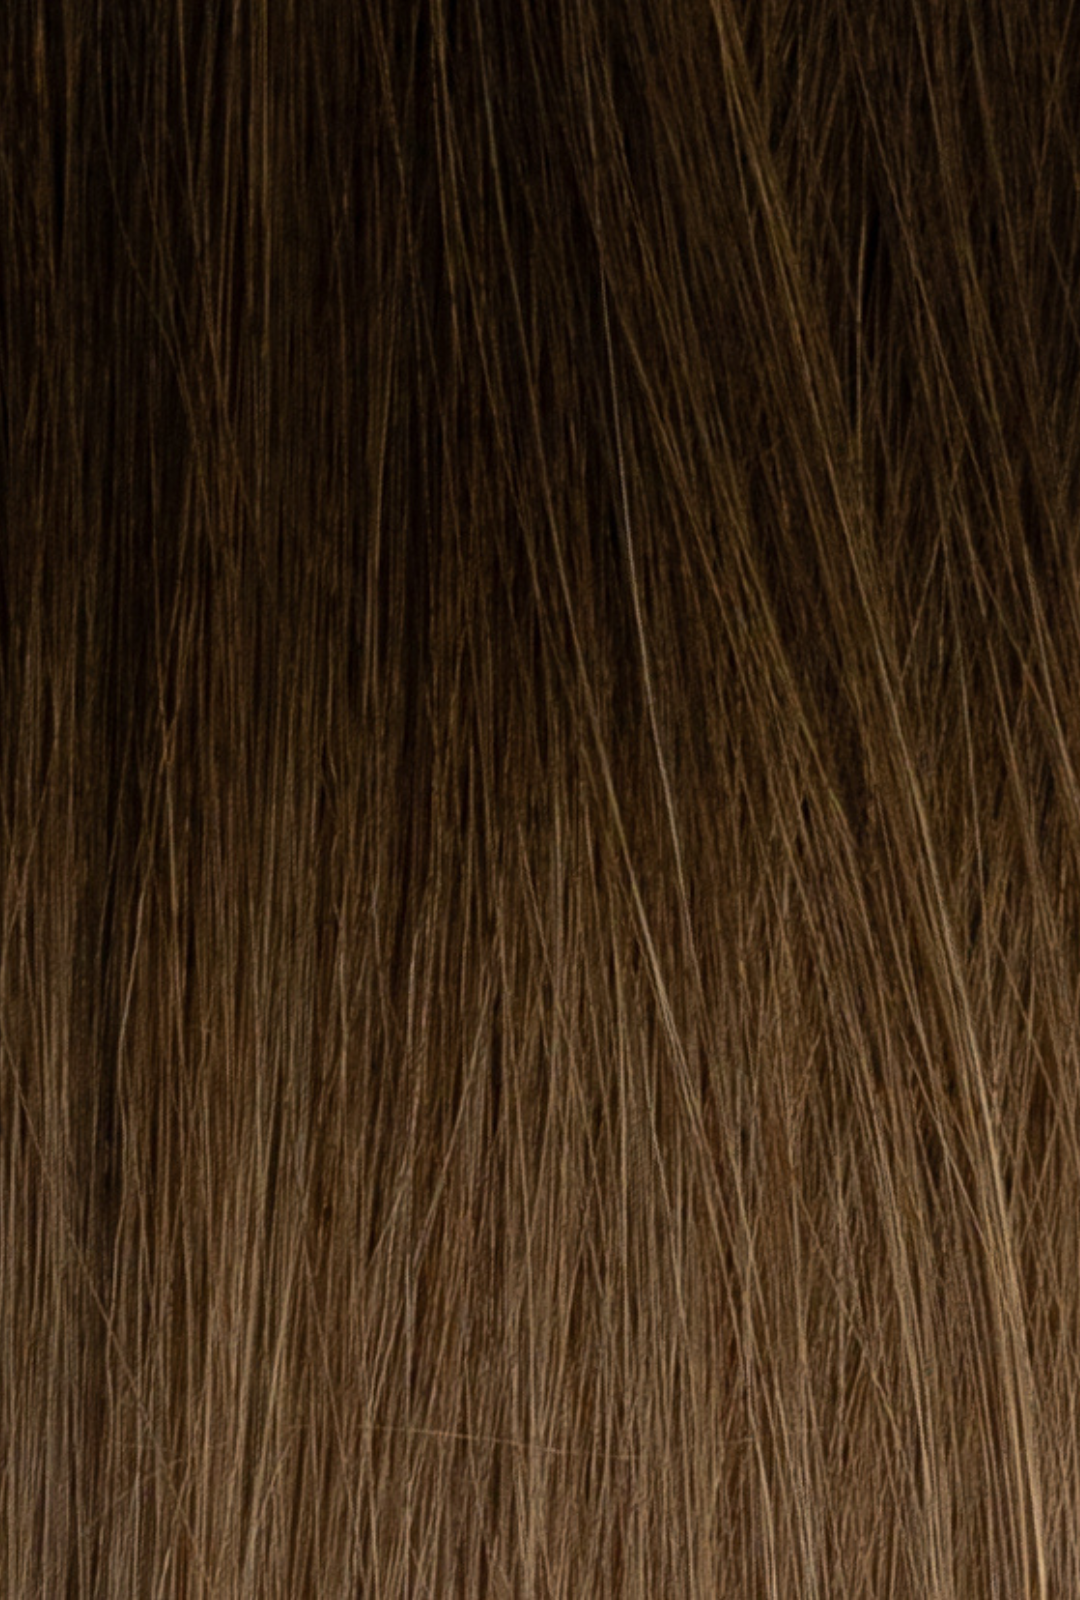 Laced Hair Keratin Bond Extensions Ombré #3/8 (Spiced Cider)